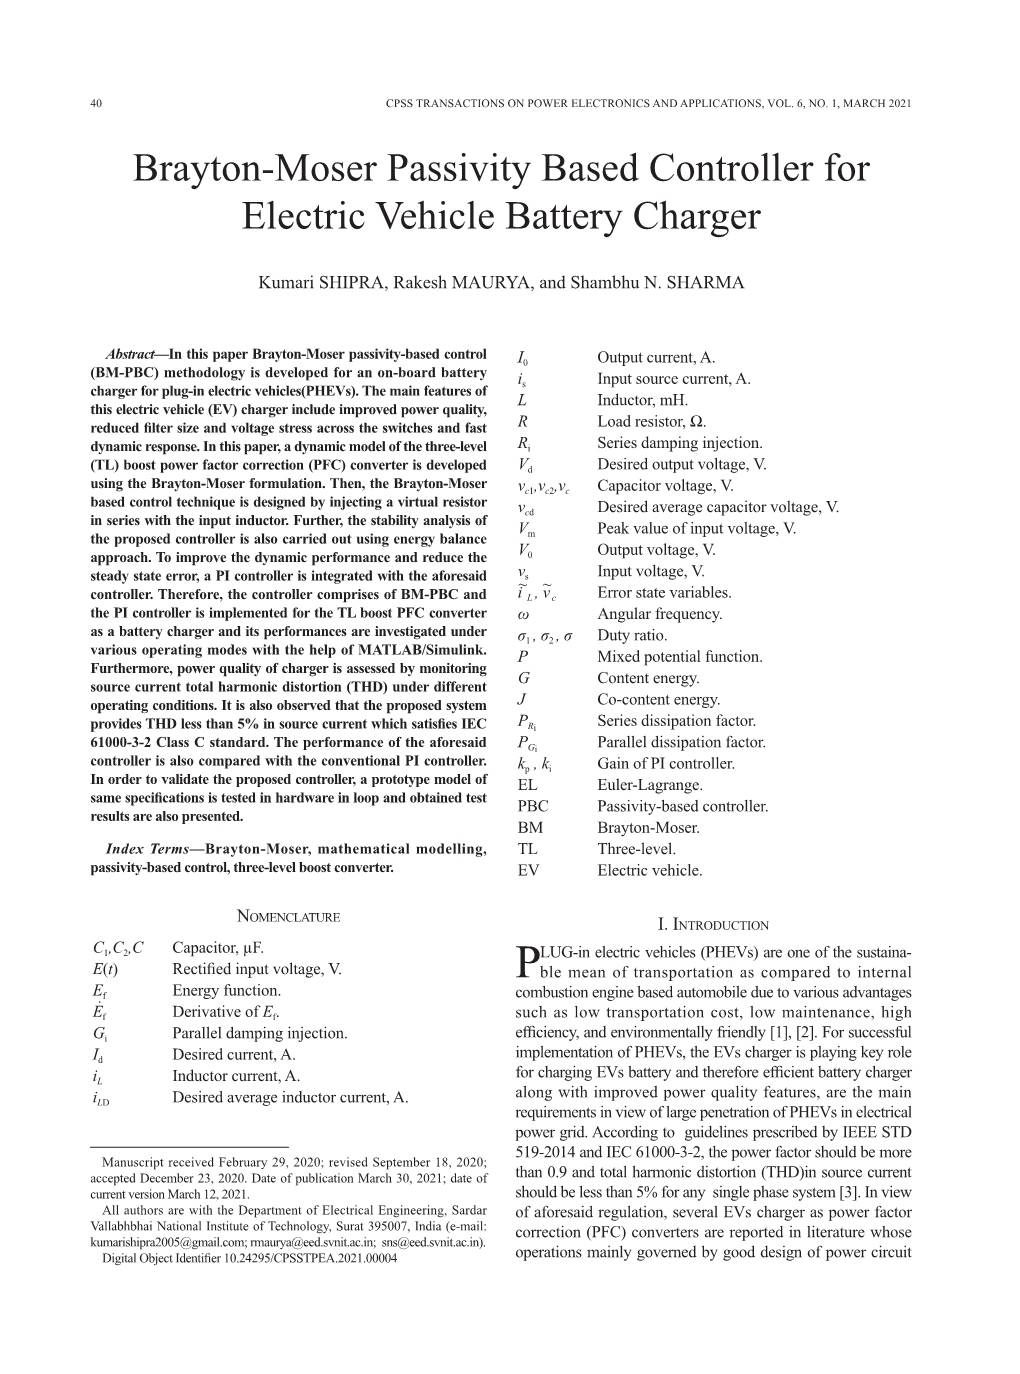 Brayton-Moser Passivity Based Controller for Electric Vehicle Battery Charger